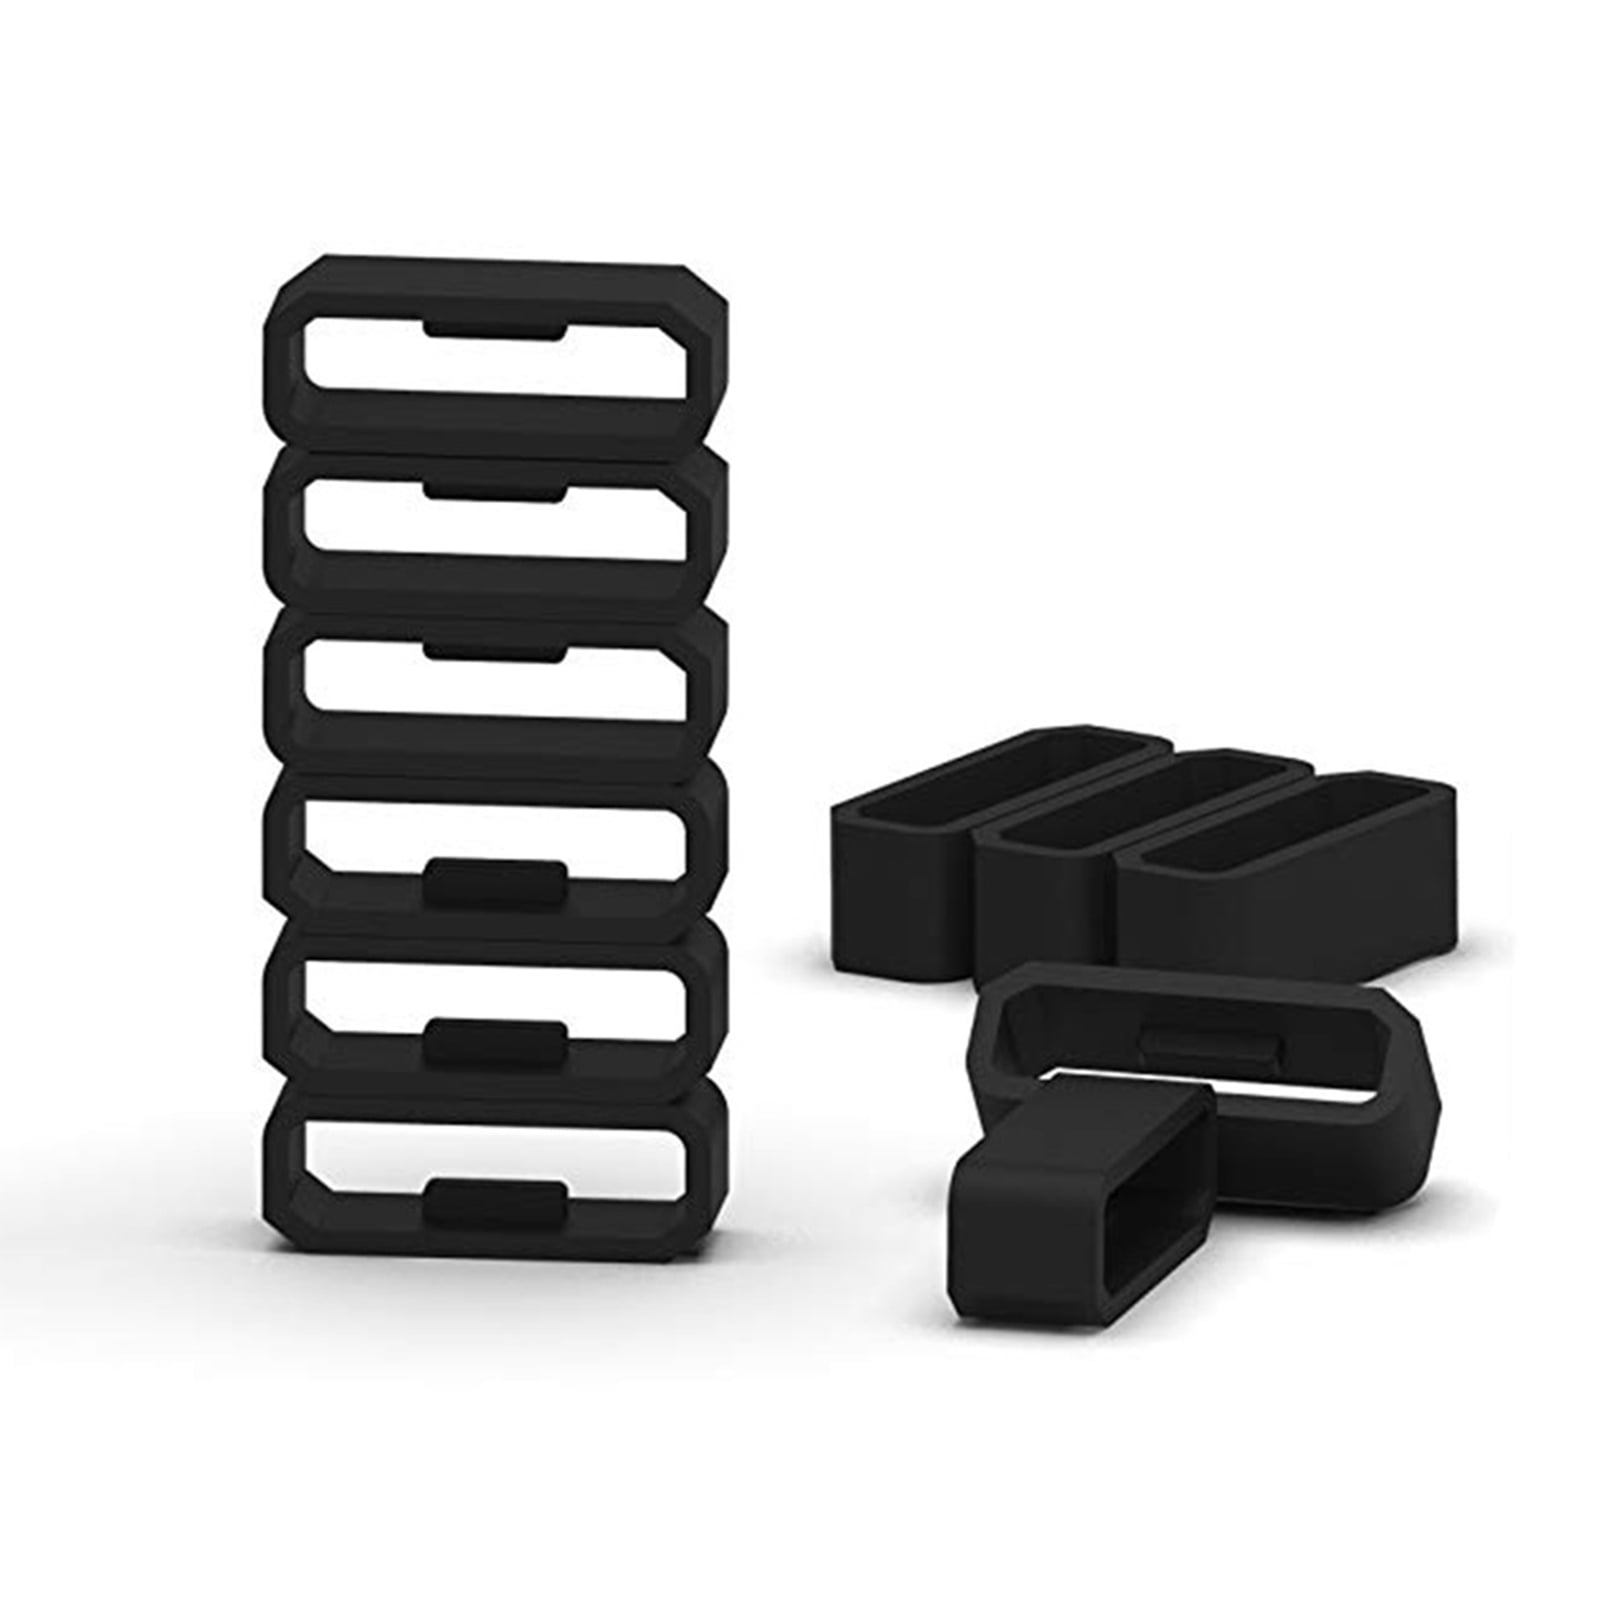 2Pcs Watch Strap Retainer Rings Soft Replacement Silicone 22mm/26mm Watchband Keeper Hoop Holder for Garmin Fenix 3/5X/5X Plus/6X/6/6 Pro/3 - Walmart.com